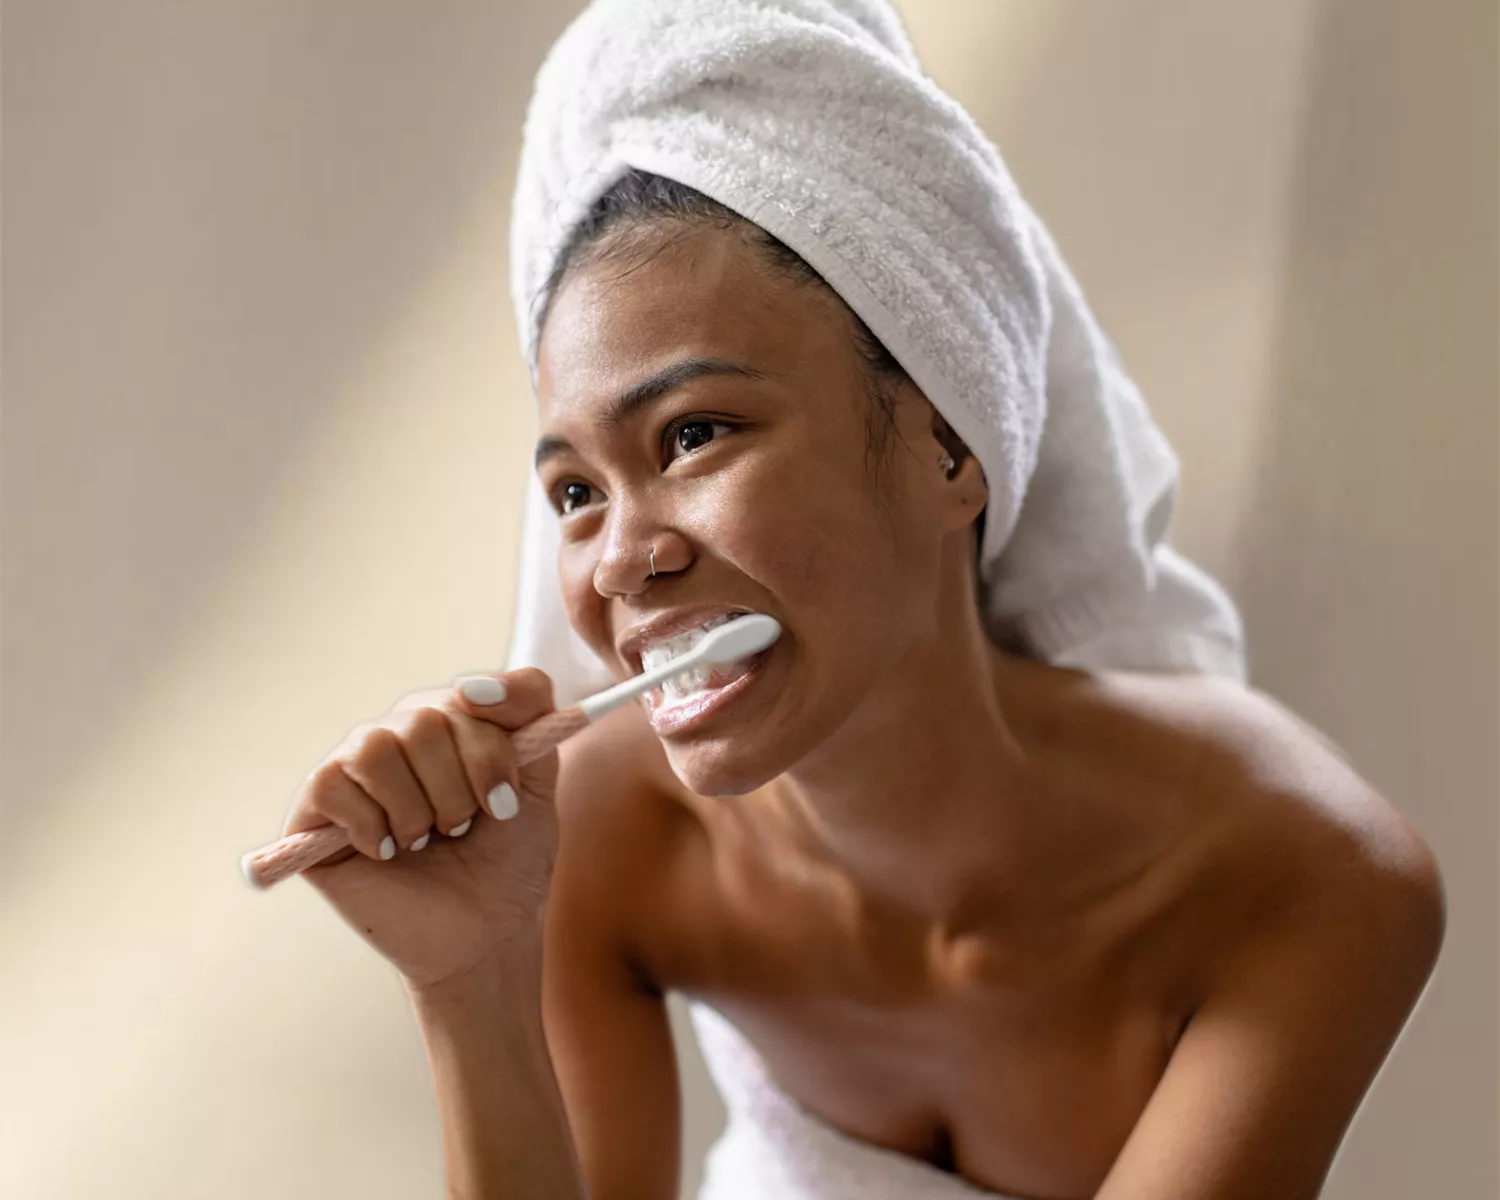 woman brushing her teeth on textured background